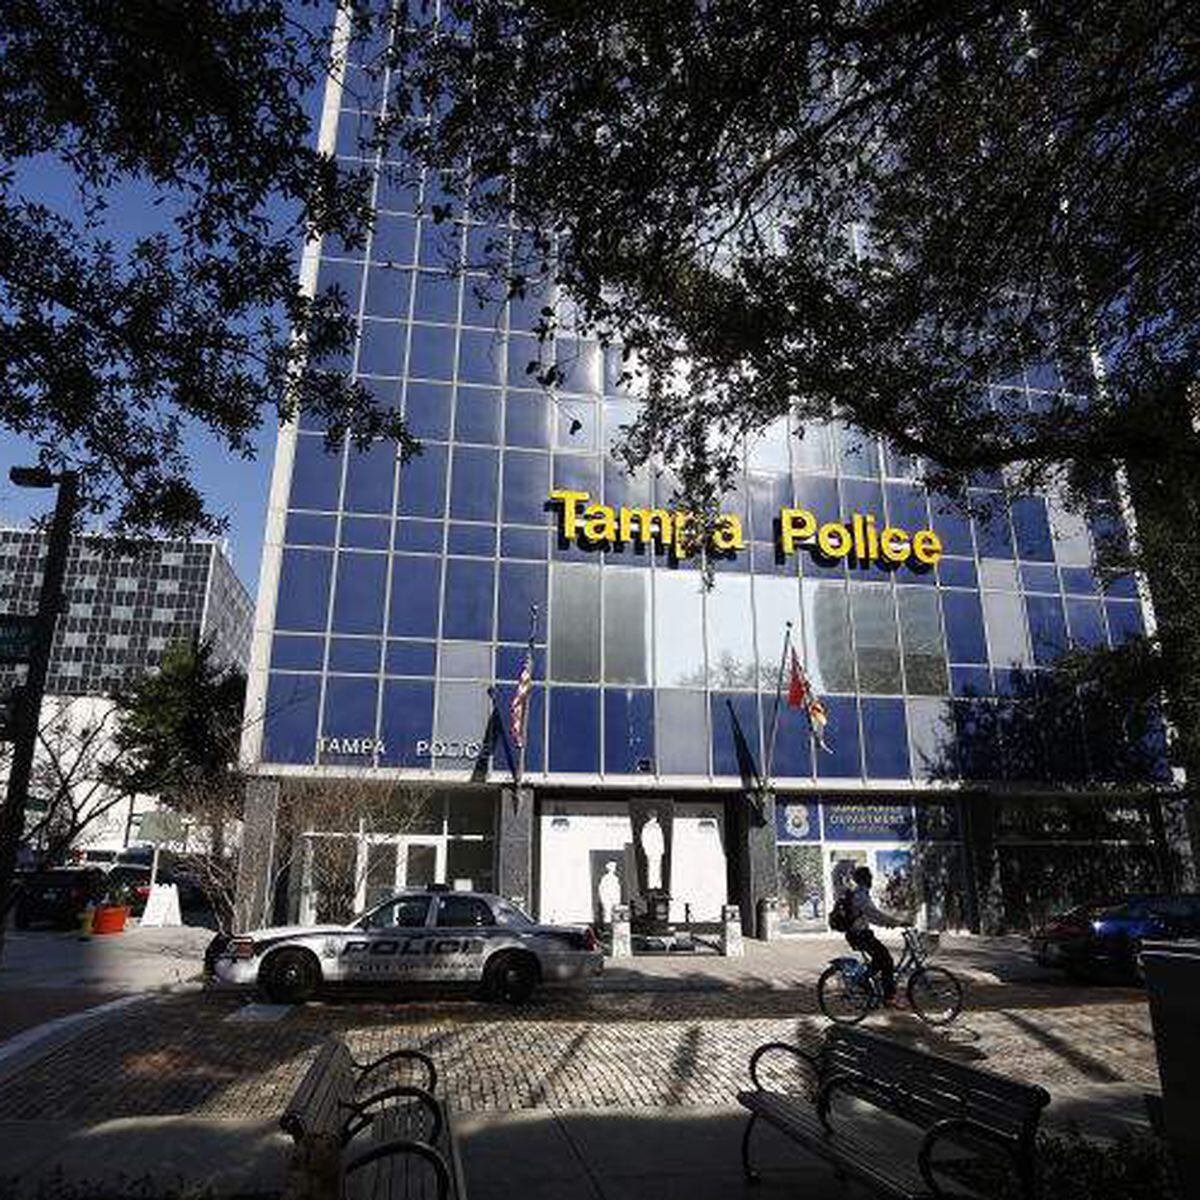 Image of City of Tampa Police Department One Police Center